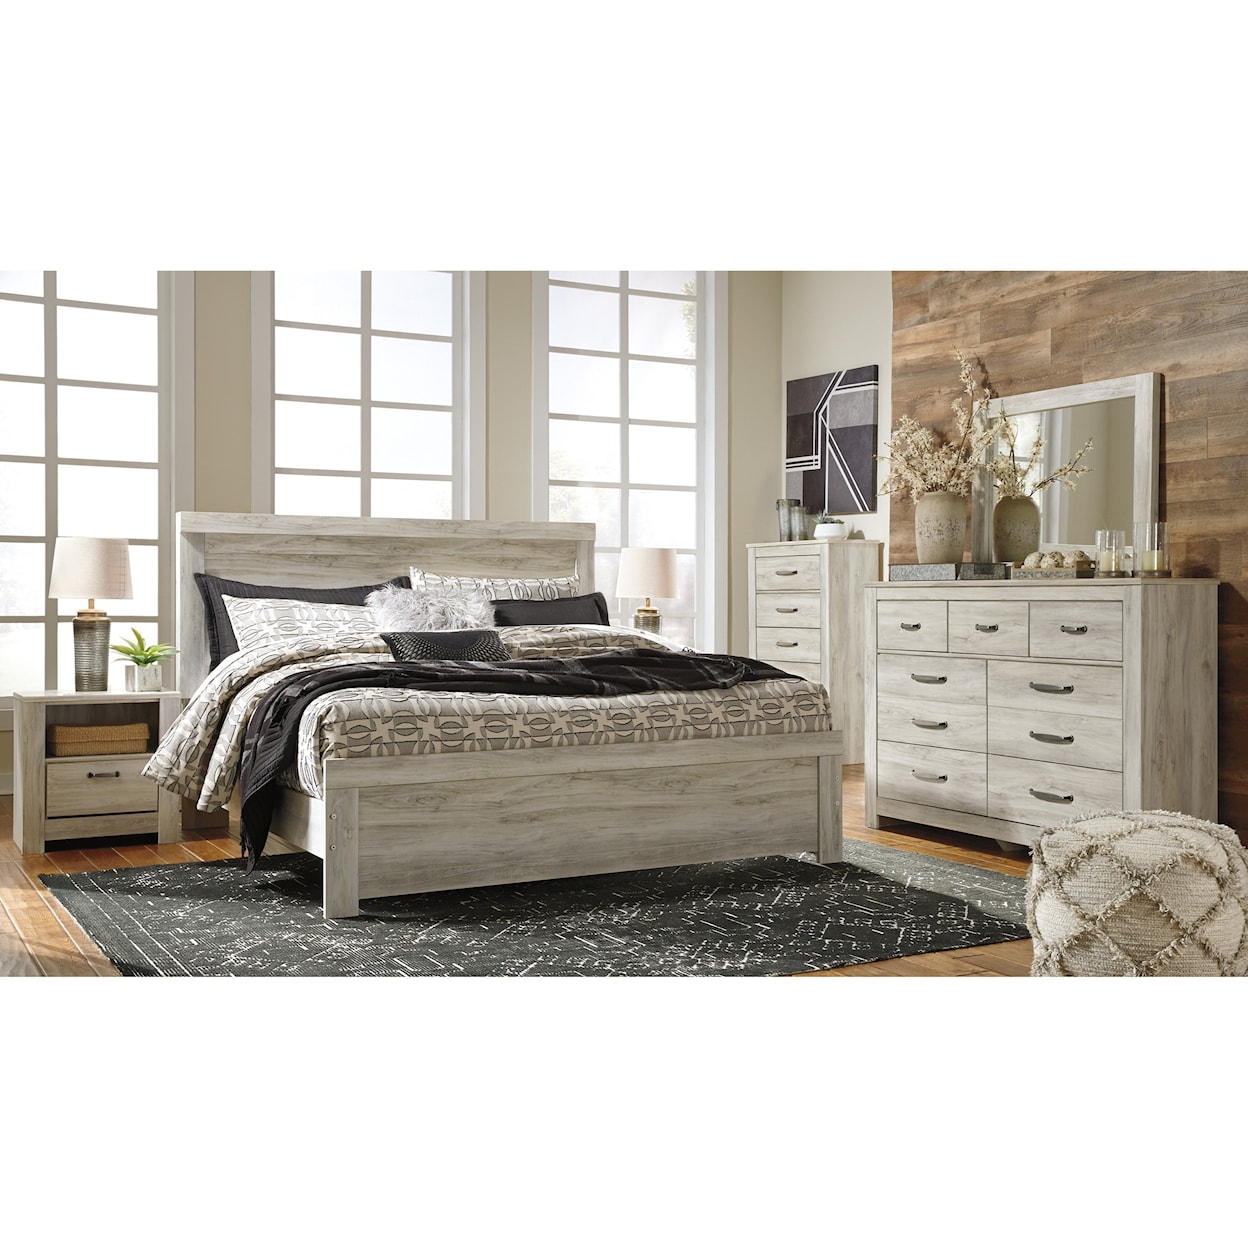 Signature Design by Ashley Furniture Bellaby King Bedroom Group